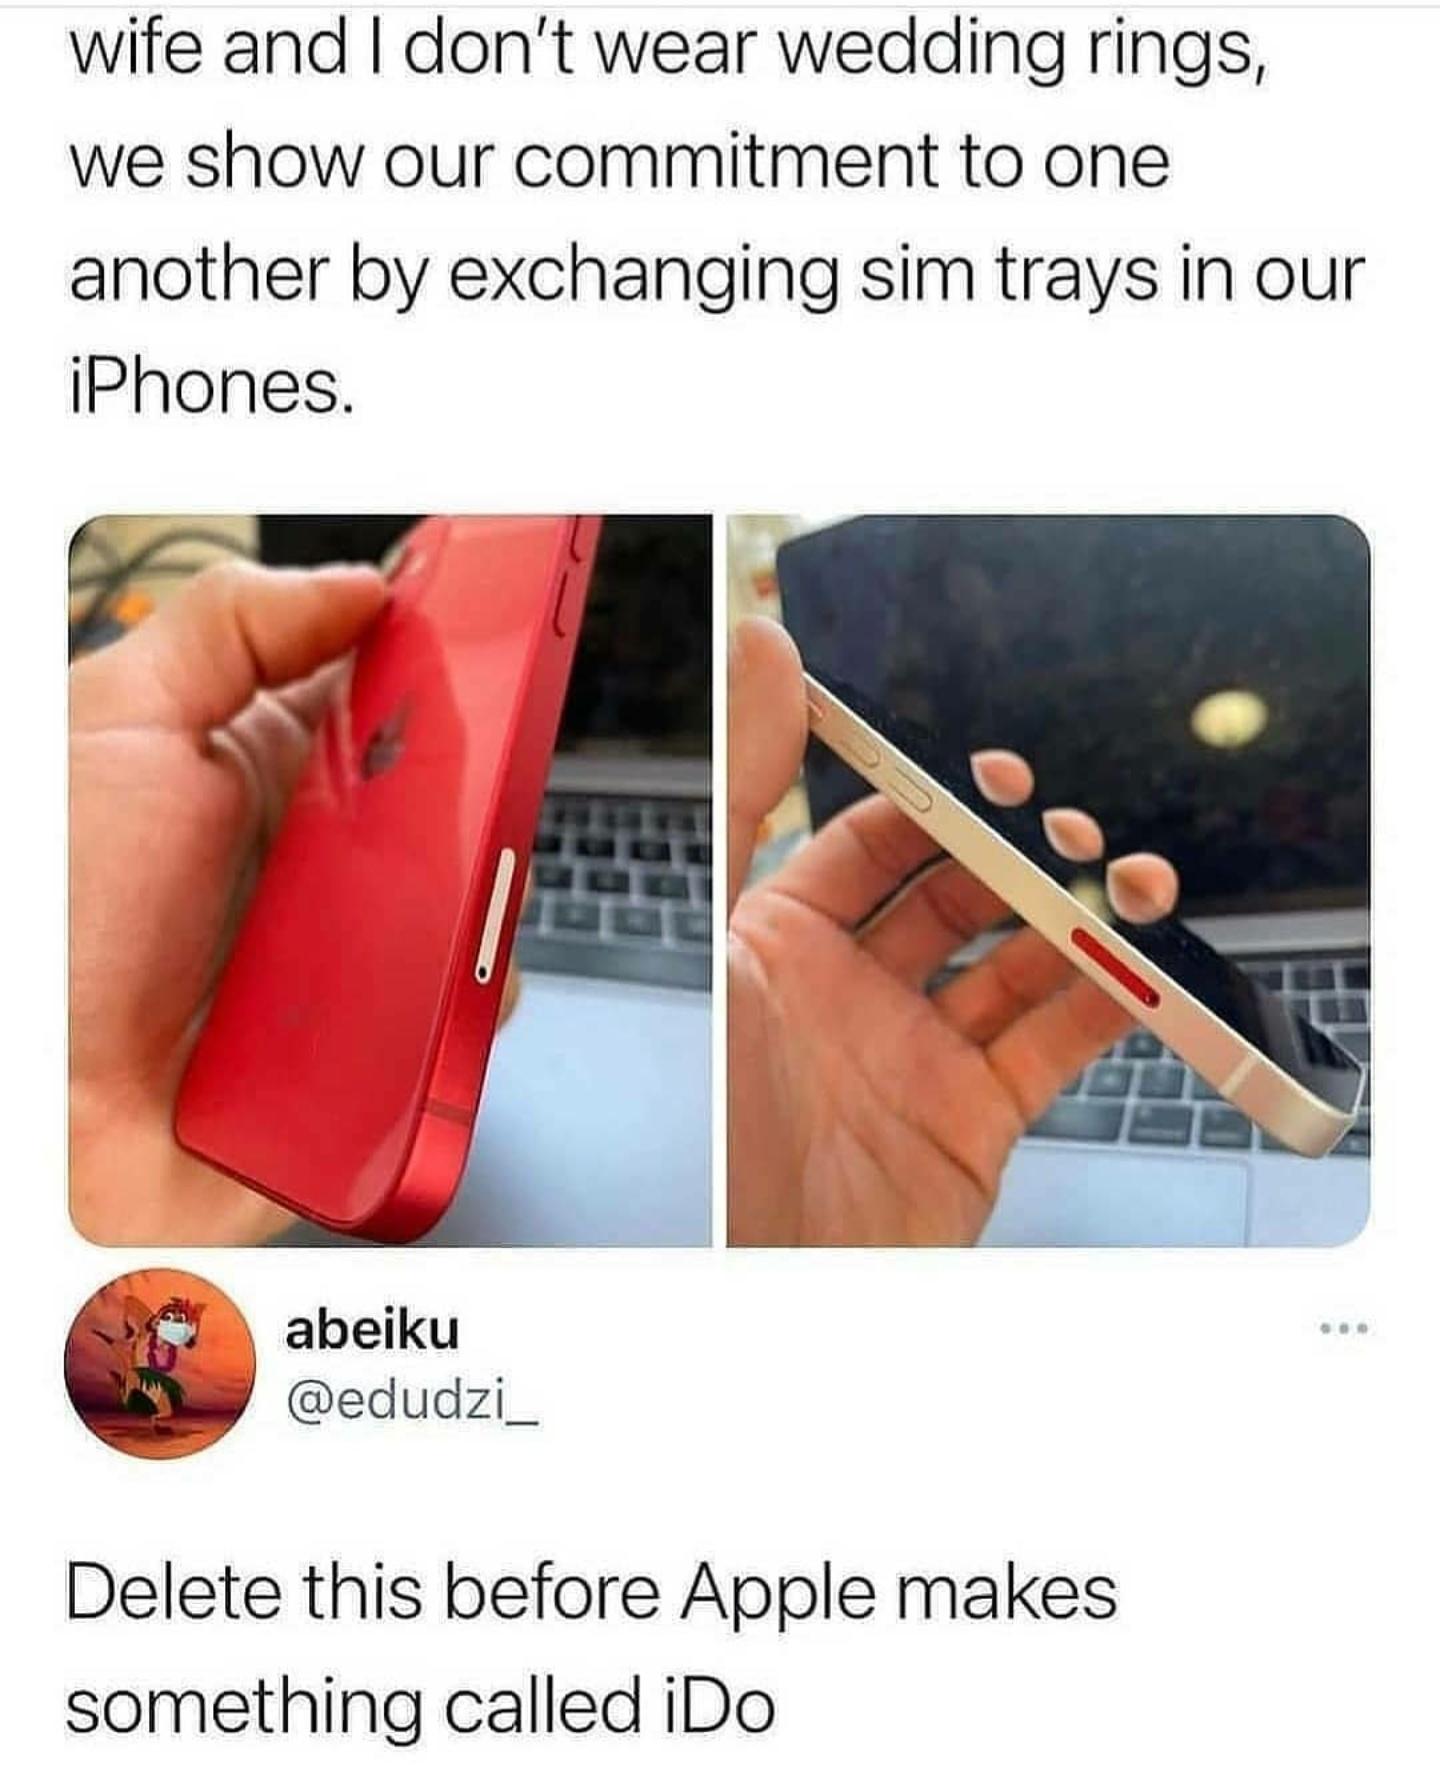 daily dose of randoms - sim tray exchange - wife and I don't wear wedding rings, we show our commitment to one another by exchanging sim trays in our iPhones. abeiku Delete this before Apple makes something called iDo